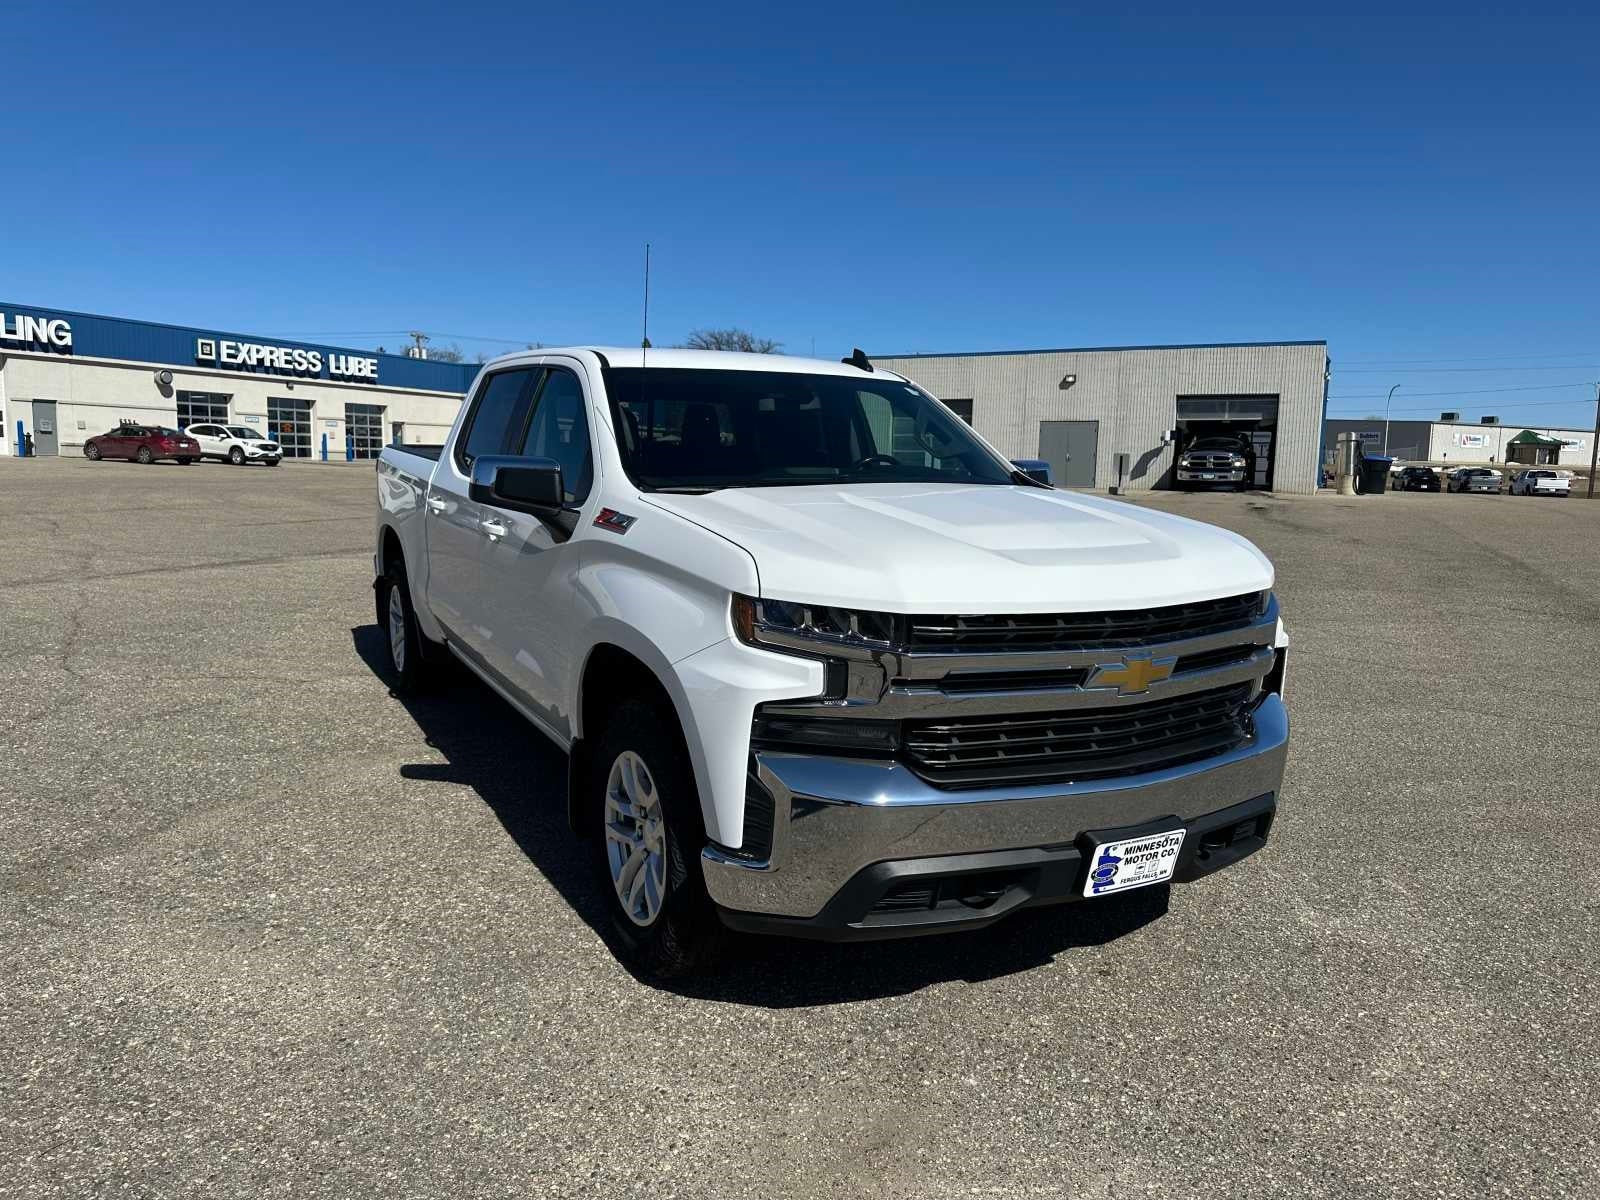 Used 2020 Chevrolet Silverado 1500 LT with VIN 3GCUYDEDXLG334033 for sale in Fergus Falls, Minnesota